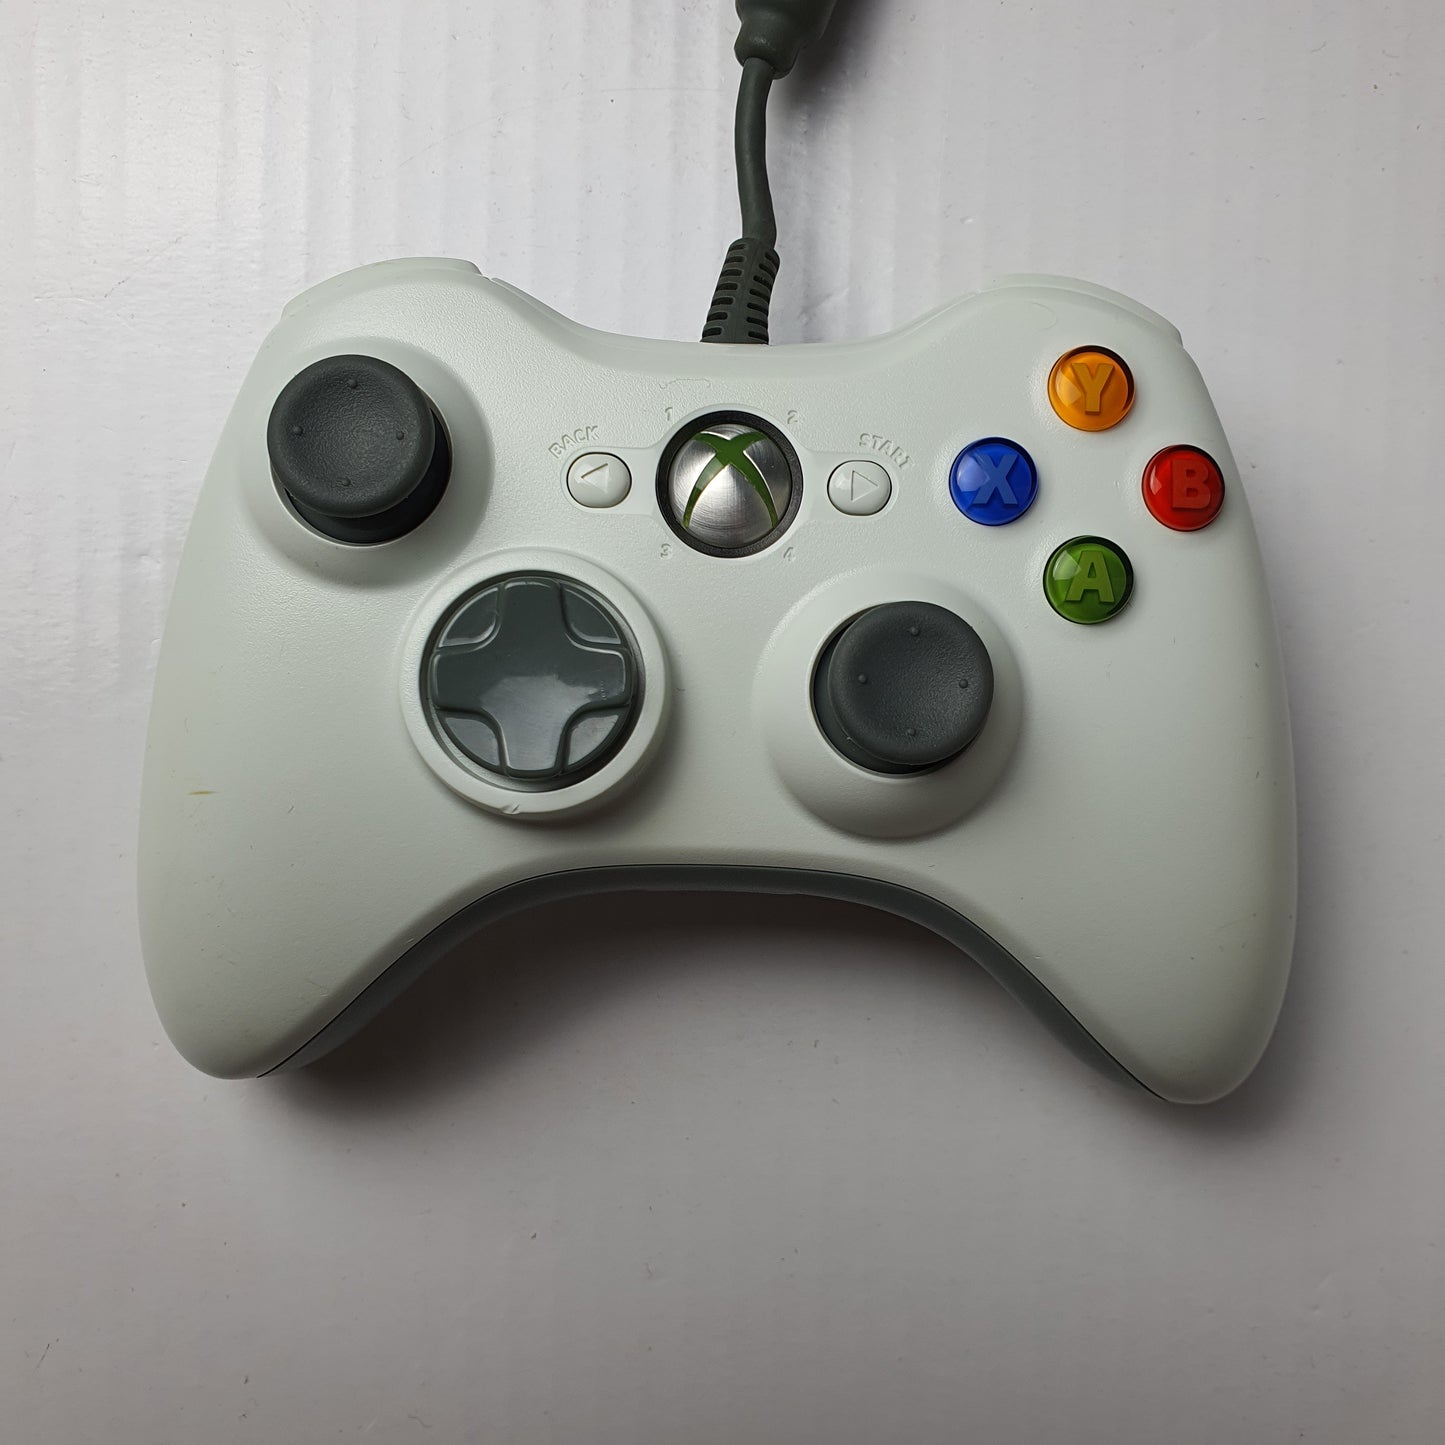 Official Microsoft Xbox 360 Wired White Controller w/ Breakaway Cable